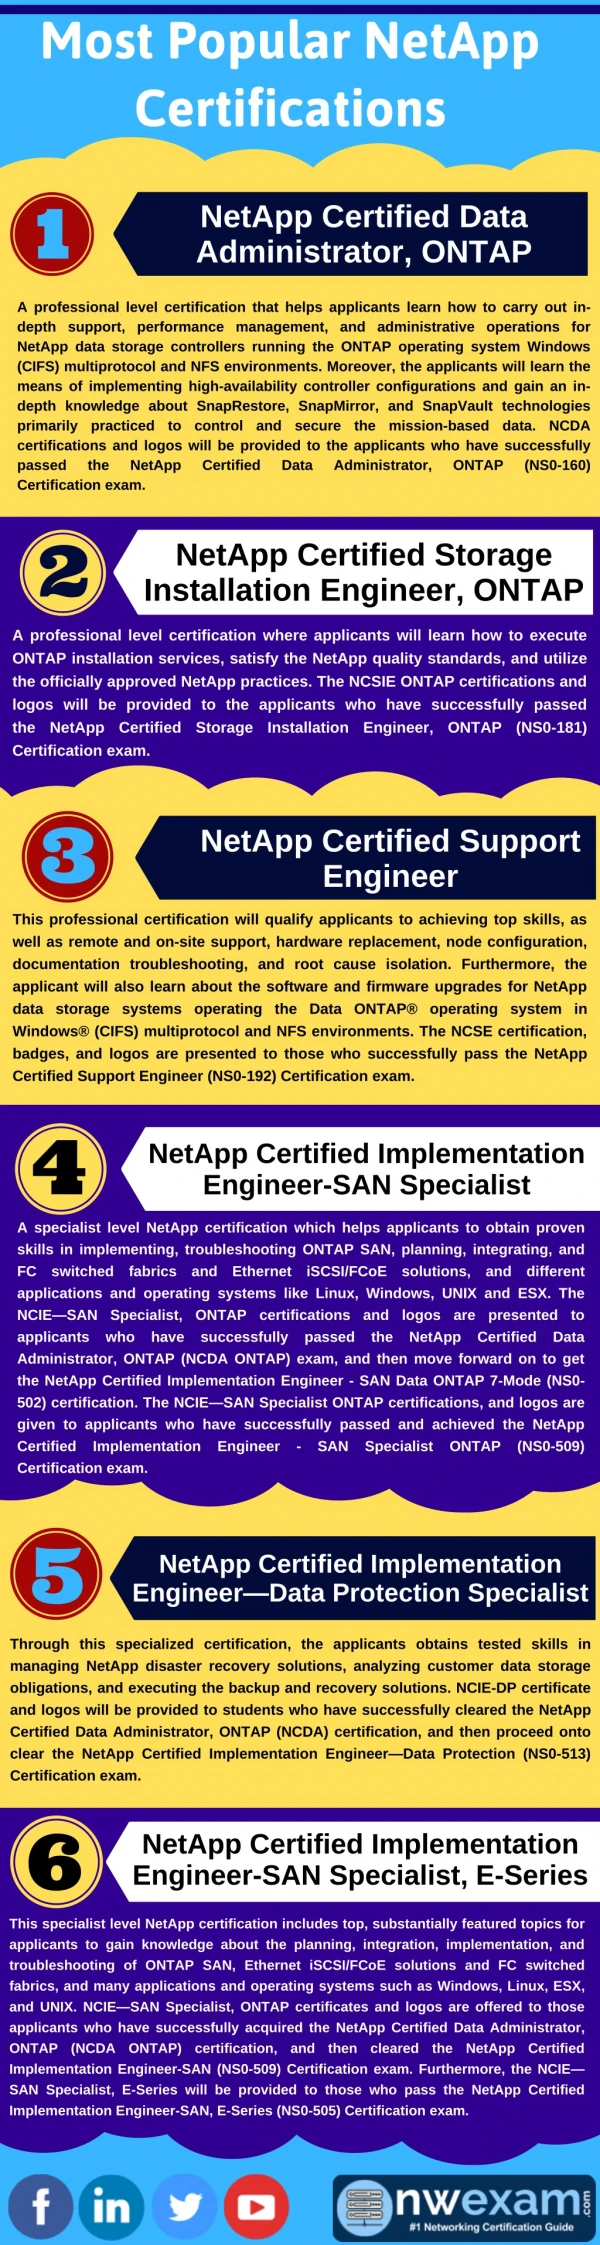 [Infographic] Know about Most Popular NetApp Certifications